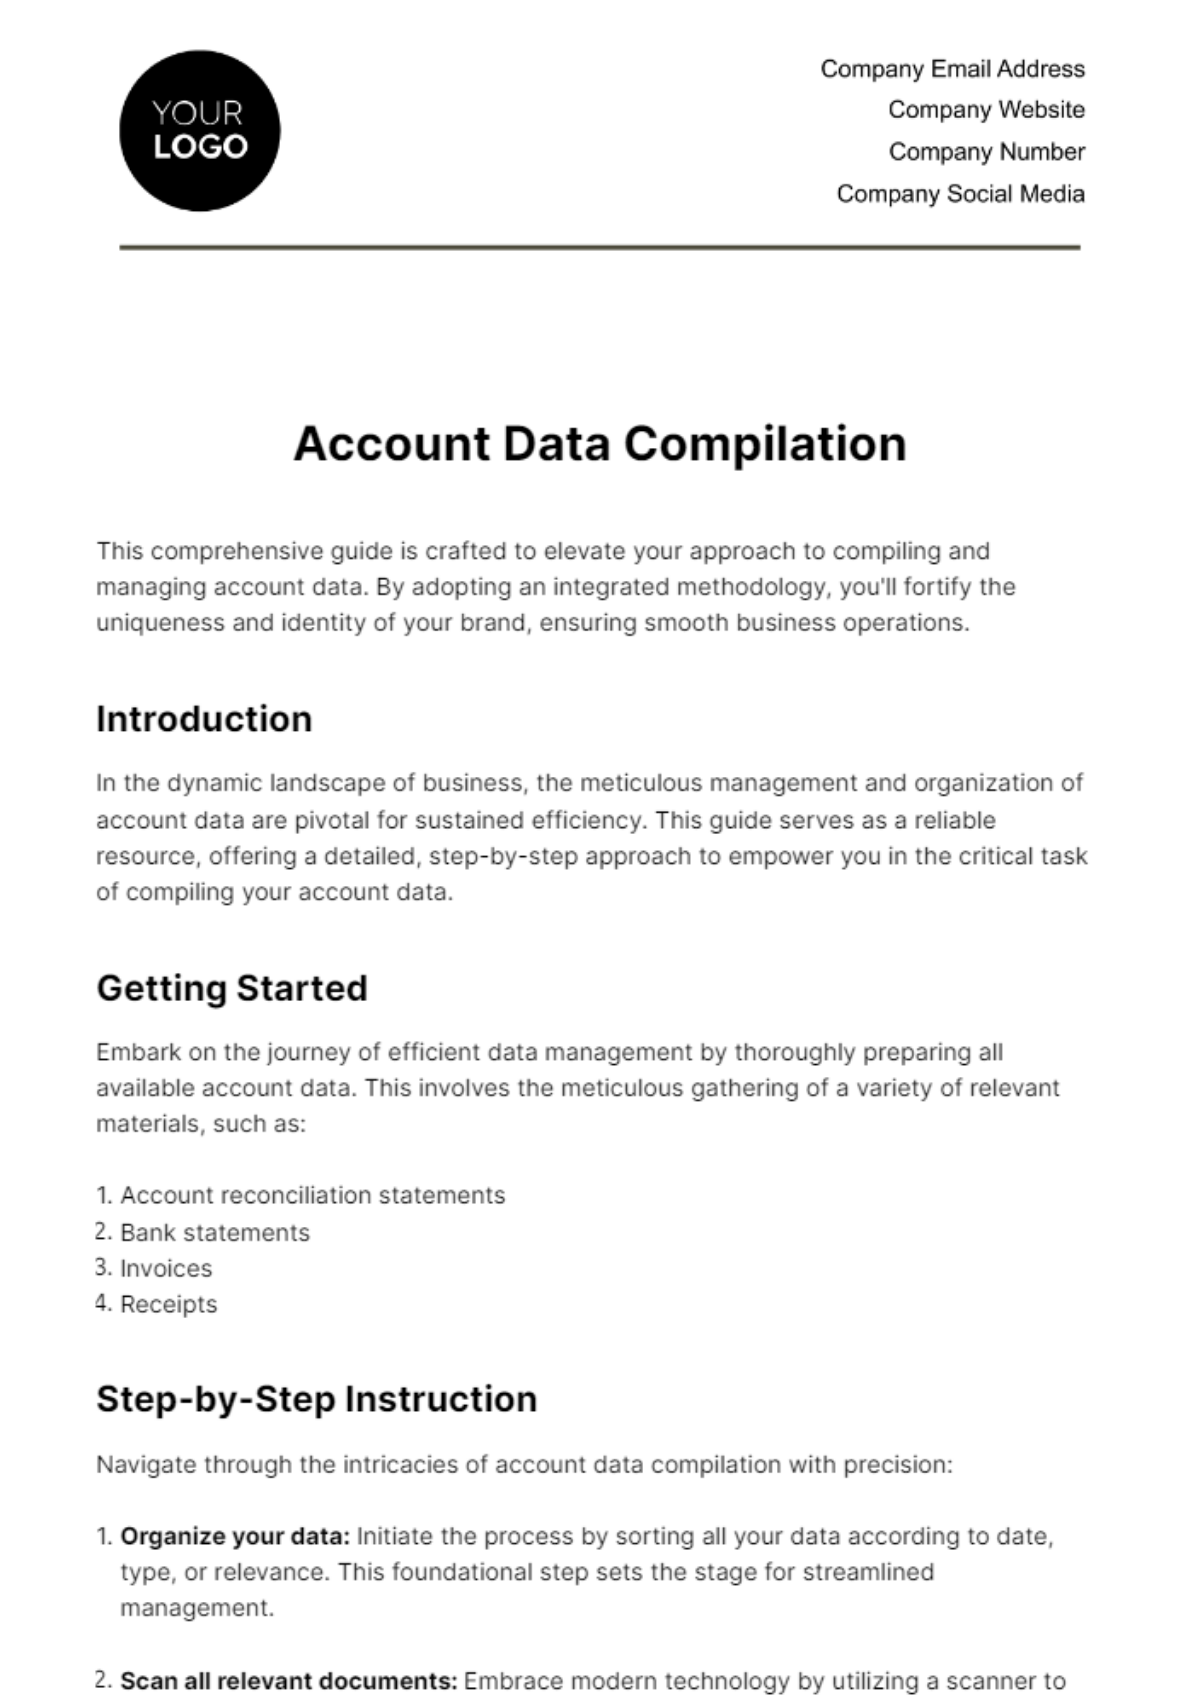 Free Account Data Compilation Template